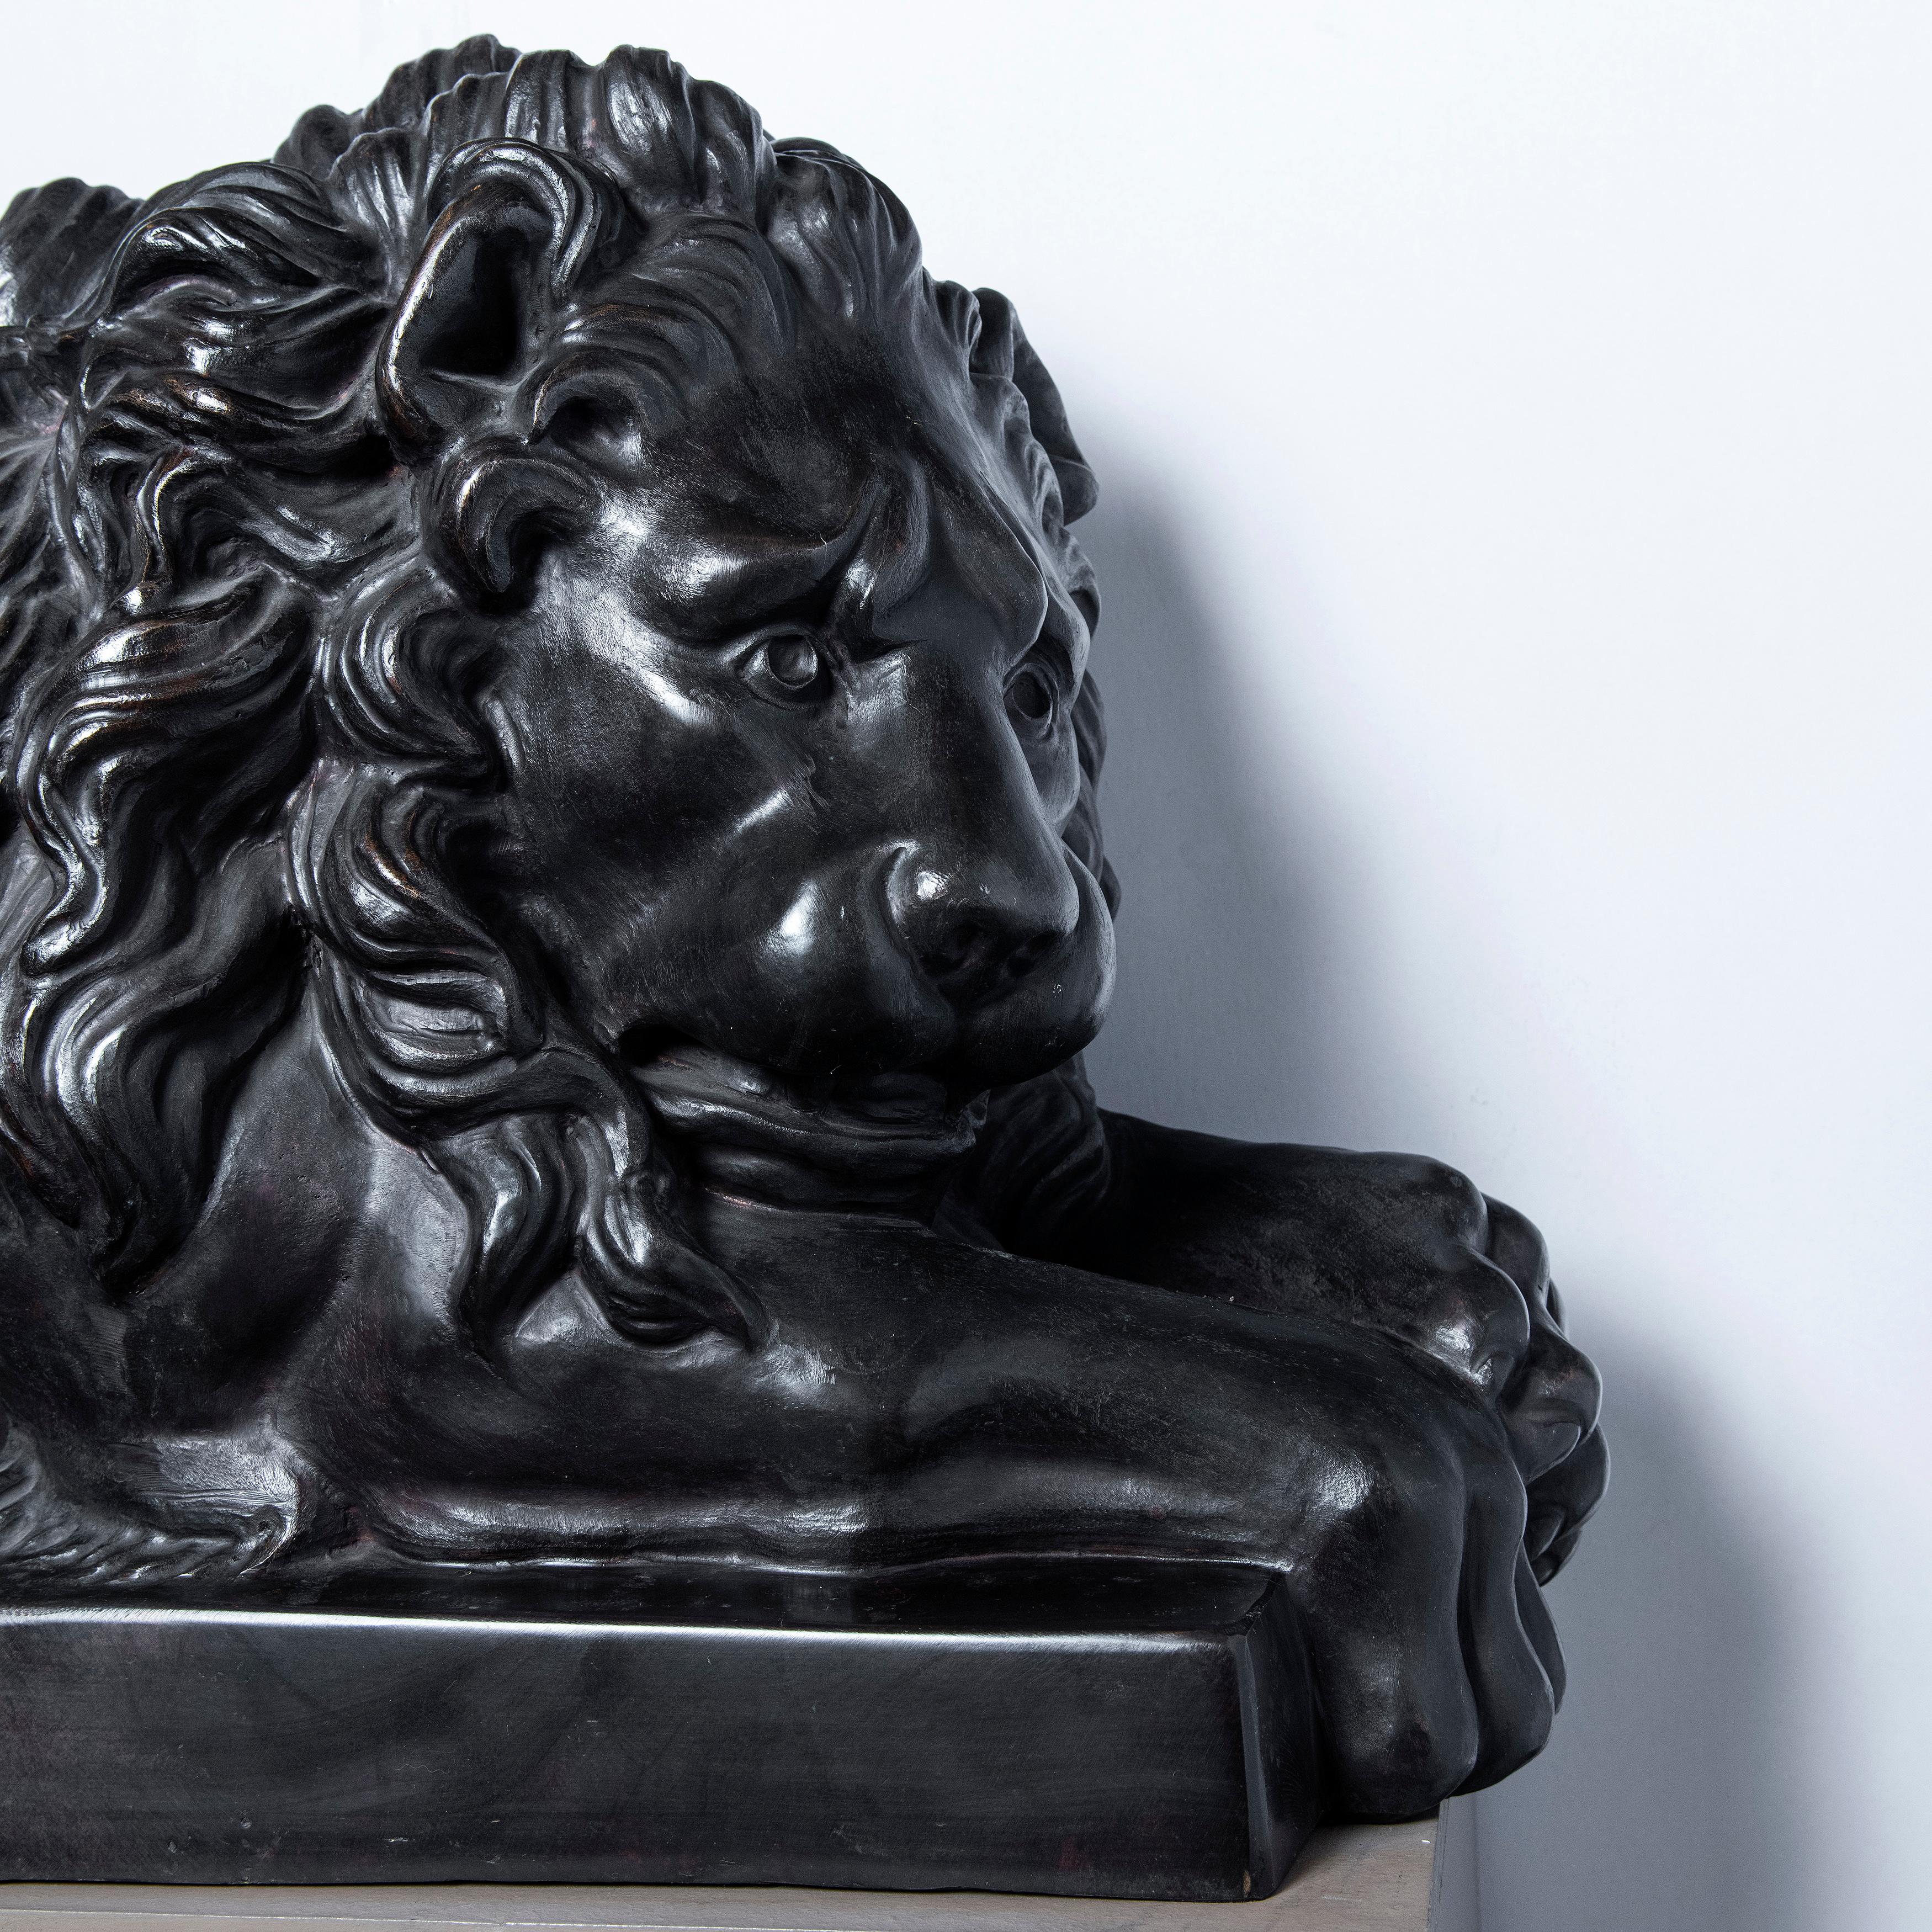 Pair of cast bronze lions, France, late 19th century.